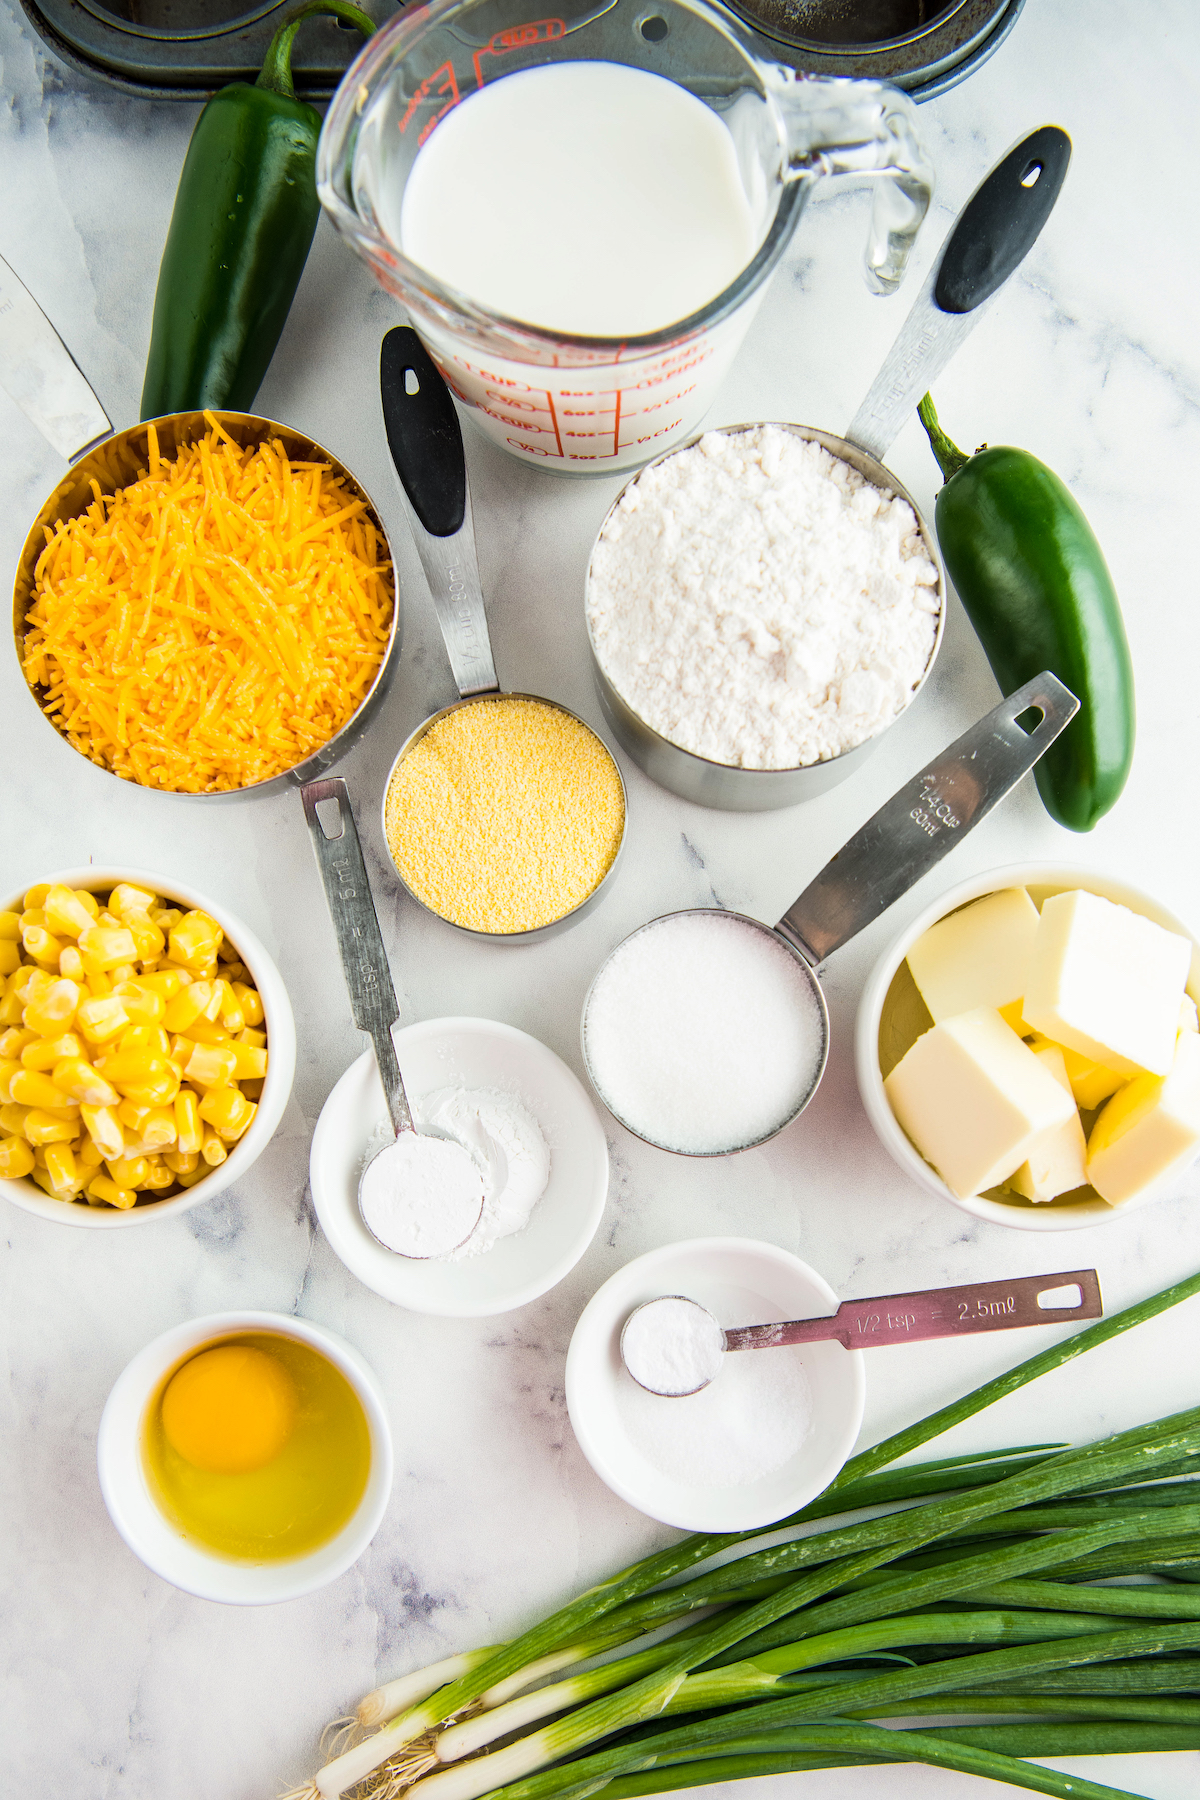 The ingredients for cornbread muffins, measured into small dishes and arranged on a work surface.